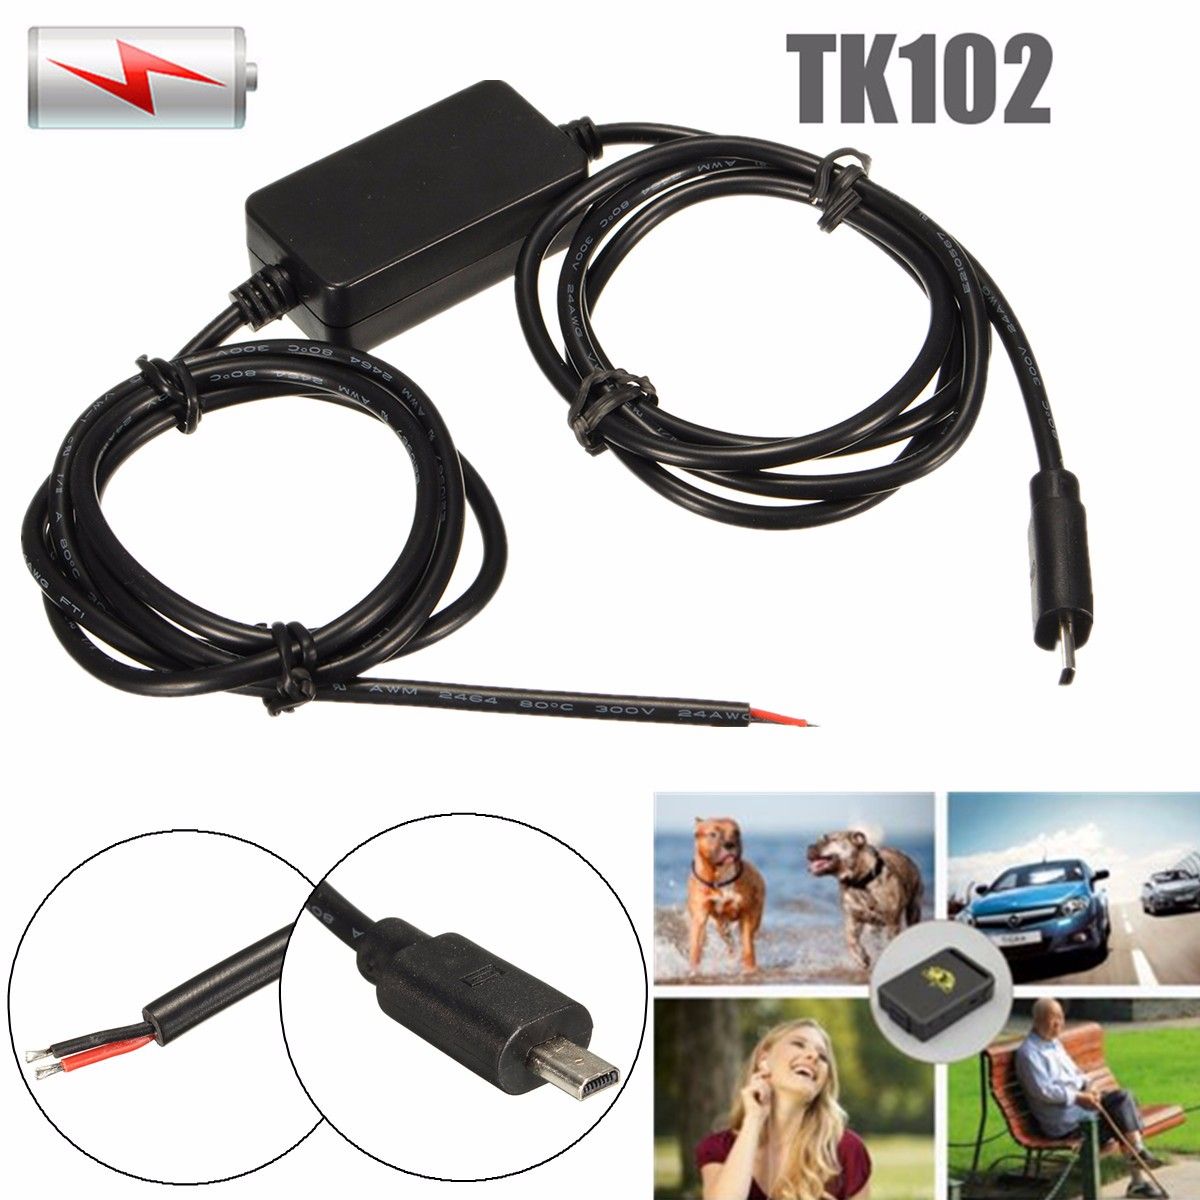 Hard-Wire-GPS-Tracker-Charger-Kit-Car-Vehicle-Battery-Adapter-for-TK102-Nano-1039912